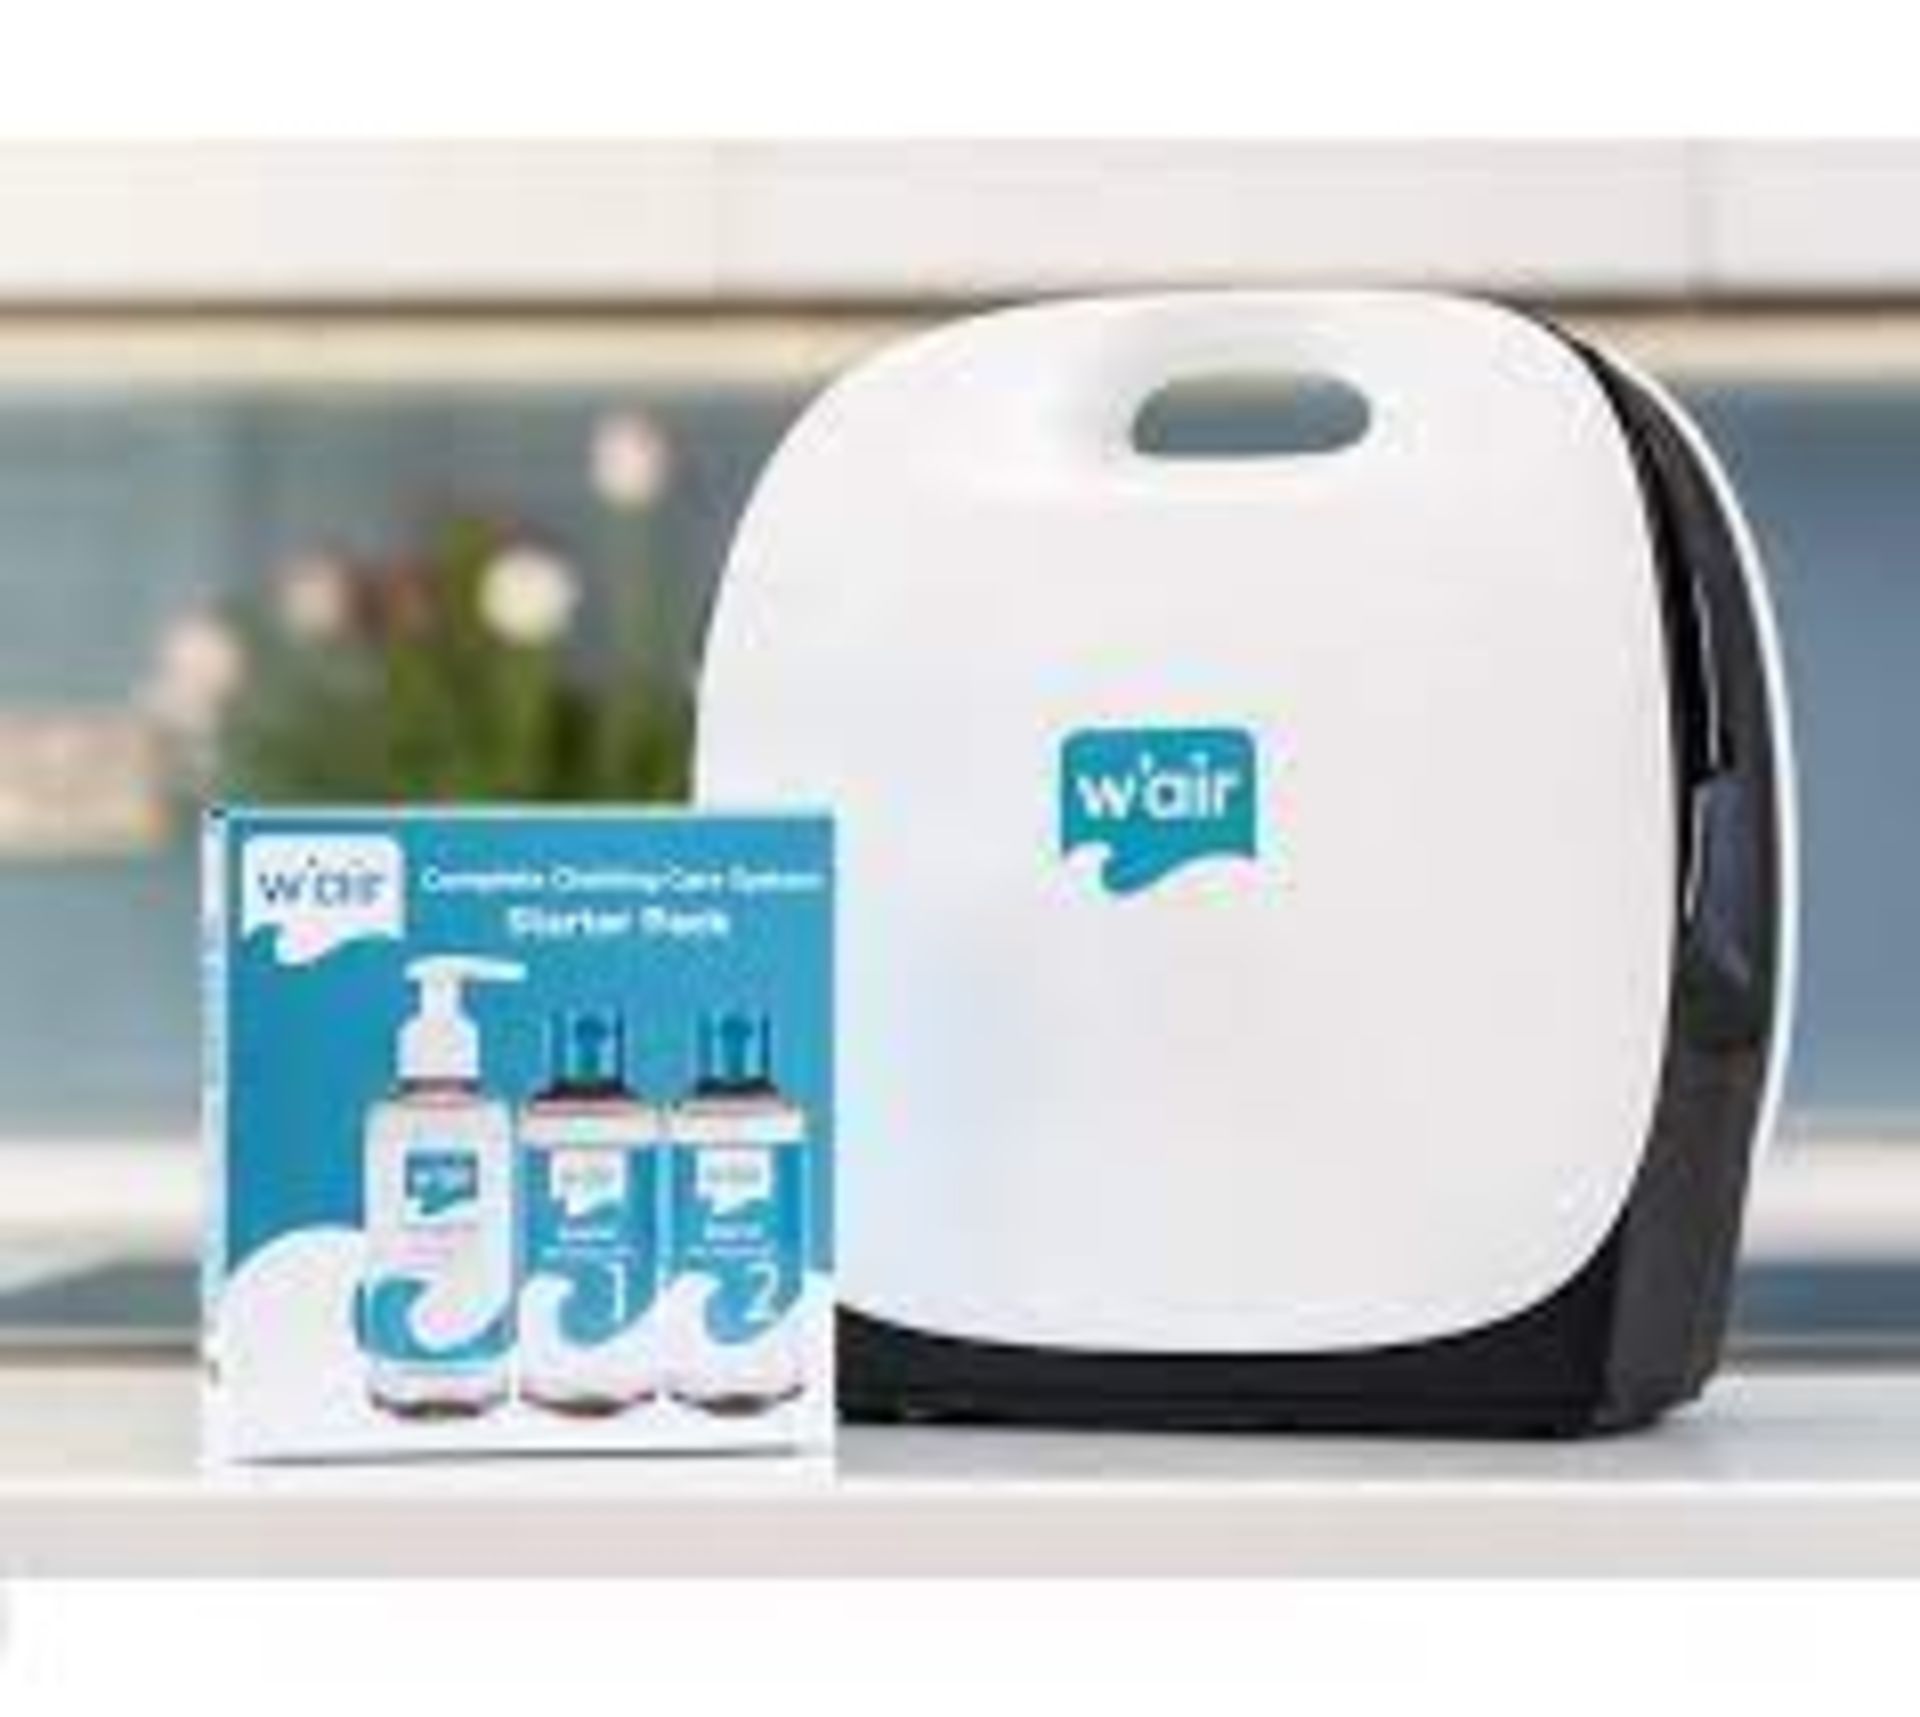 5 X BRAND NEW W'AIR SNEAKER CLEANING SYSTEMS RRP £299, The w'air uses hydrodynamic technology - Image 5 of 6